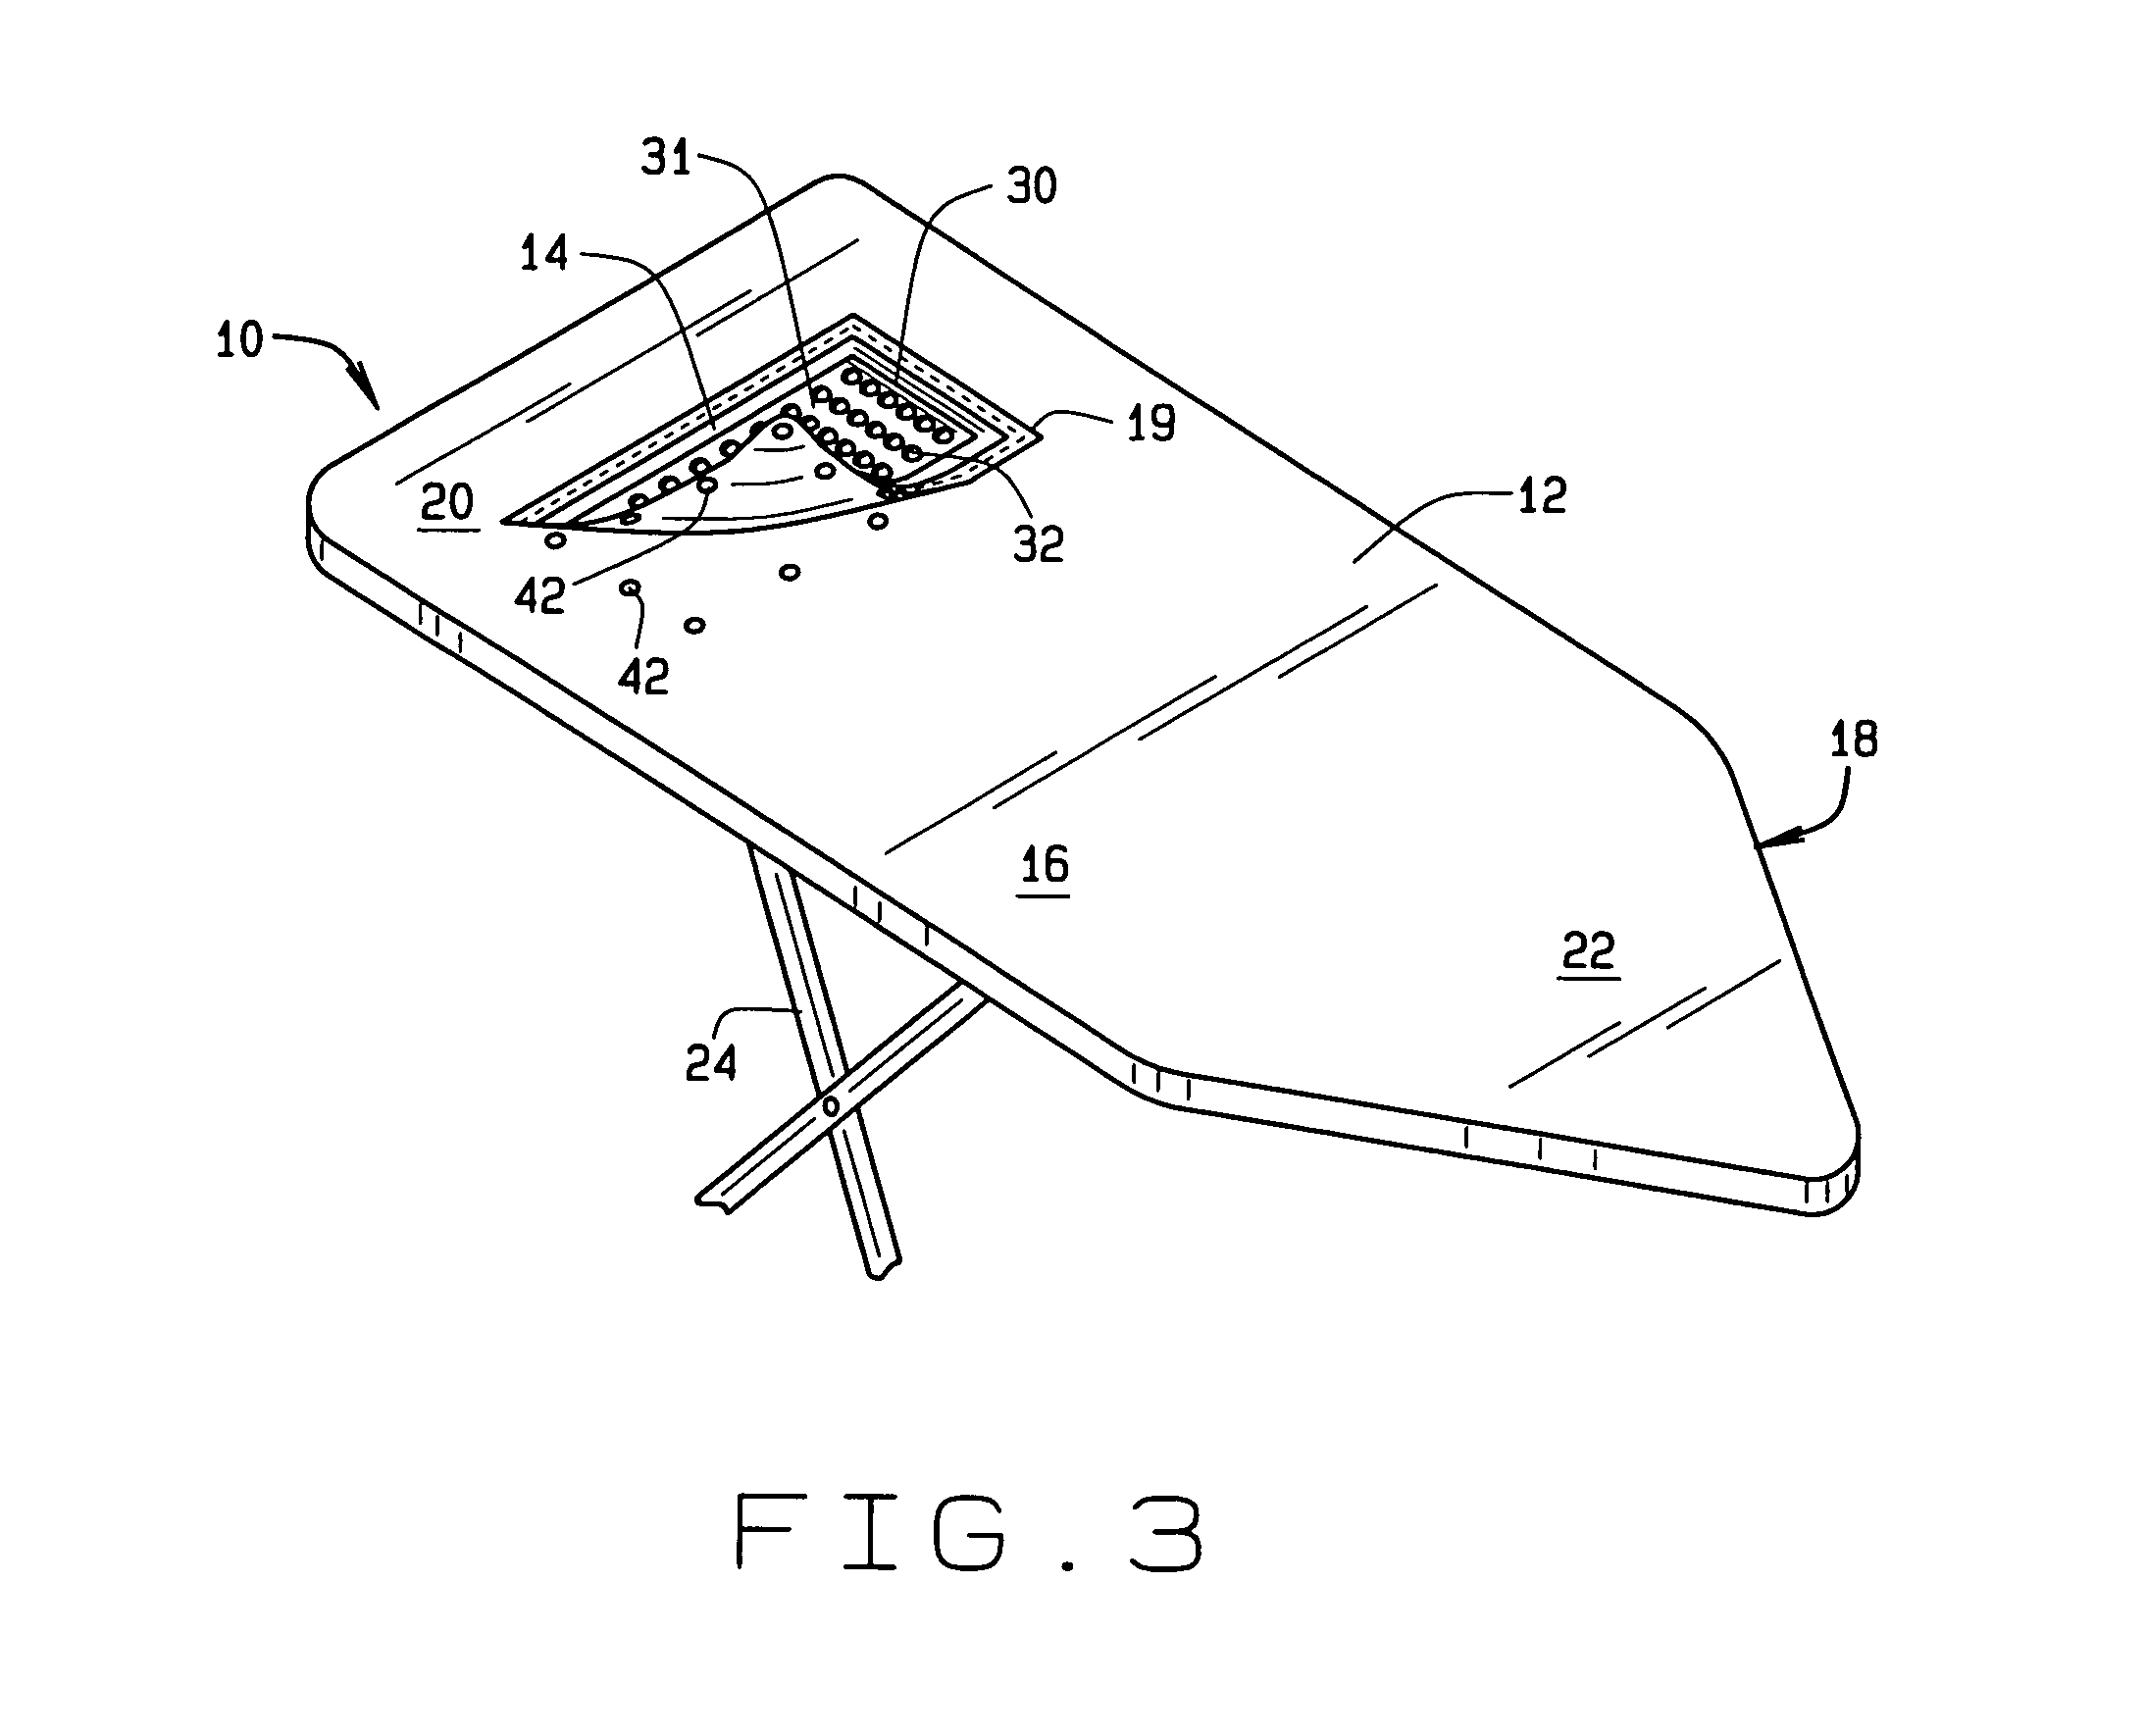 Ironing board cover with panel and methods of use